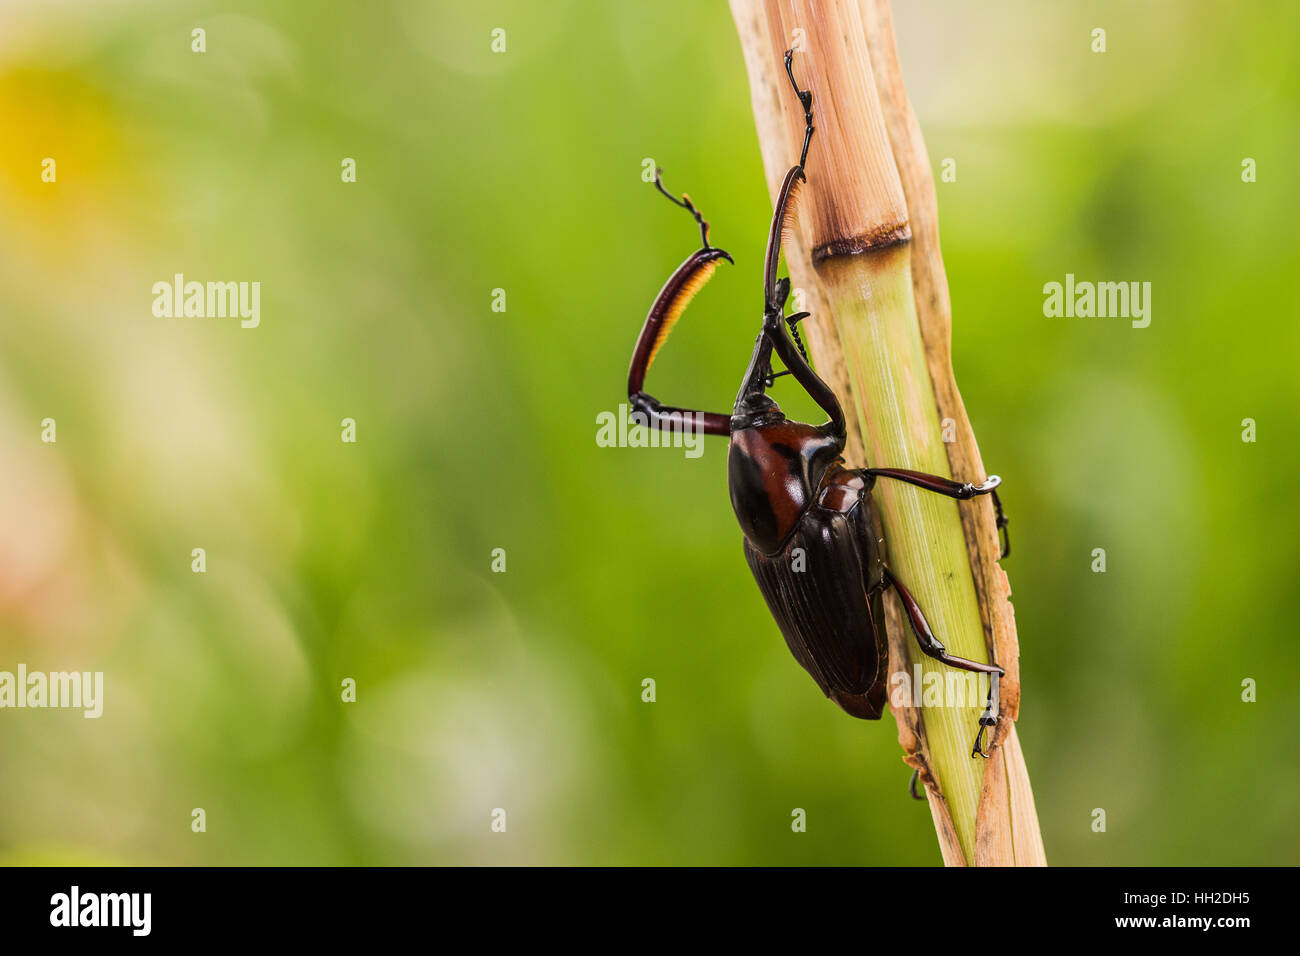 Snout Beetle eating on the plant Stock Photo